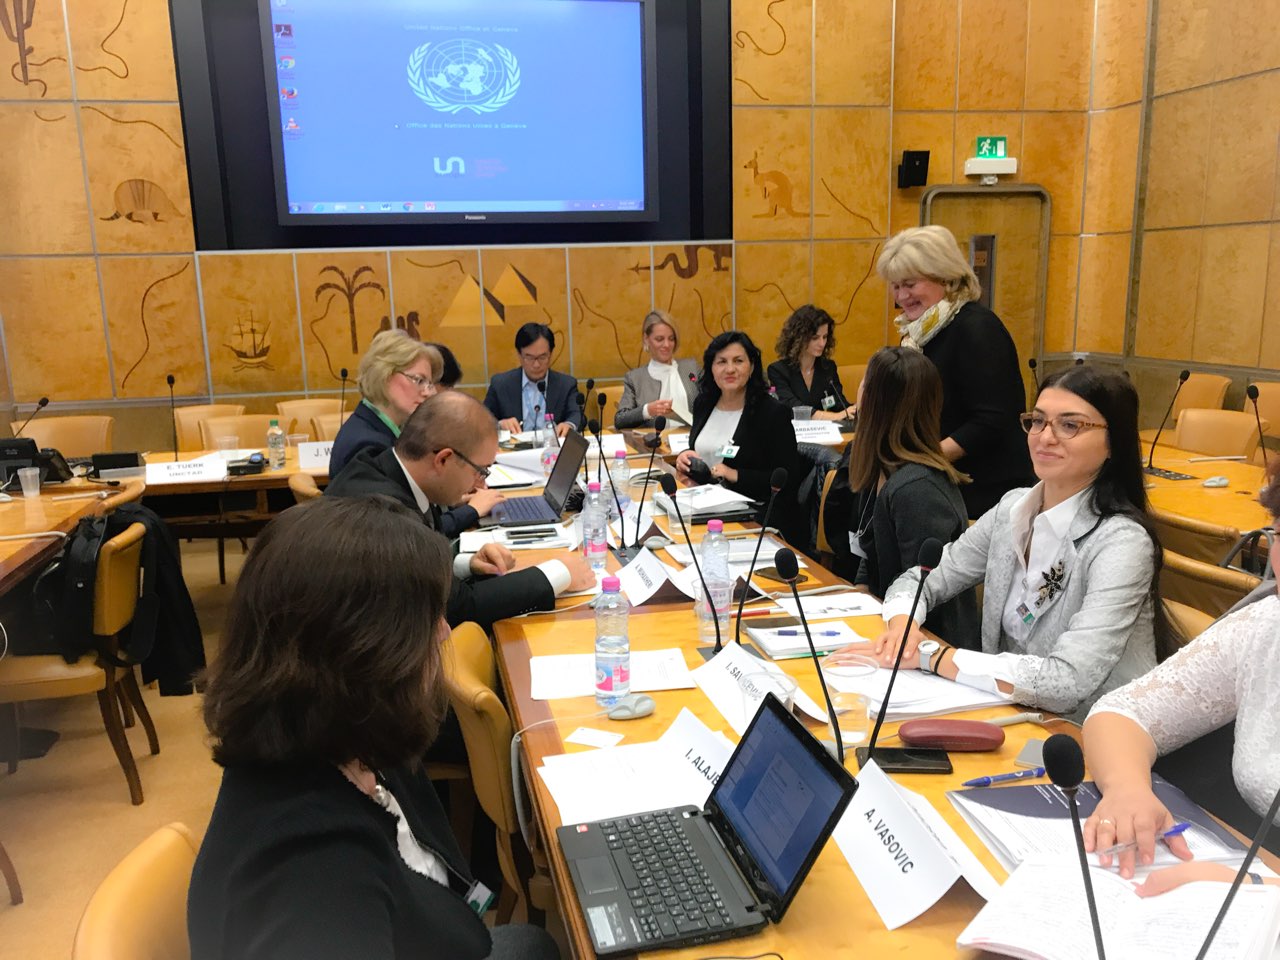 SEE International Investment Agreements negotiators gathered for the first time ever, under the umbrella of the RCC, to talk about the main issues of existing network of IIAs in the region and draft the proposals for their modernization and upgrade, on 12 October 2017, in Geneva. (Photo: RCC)